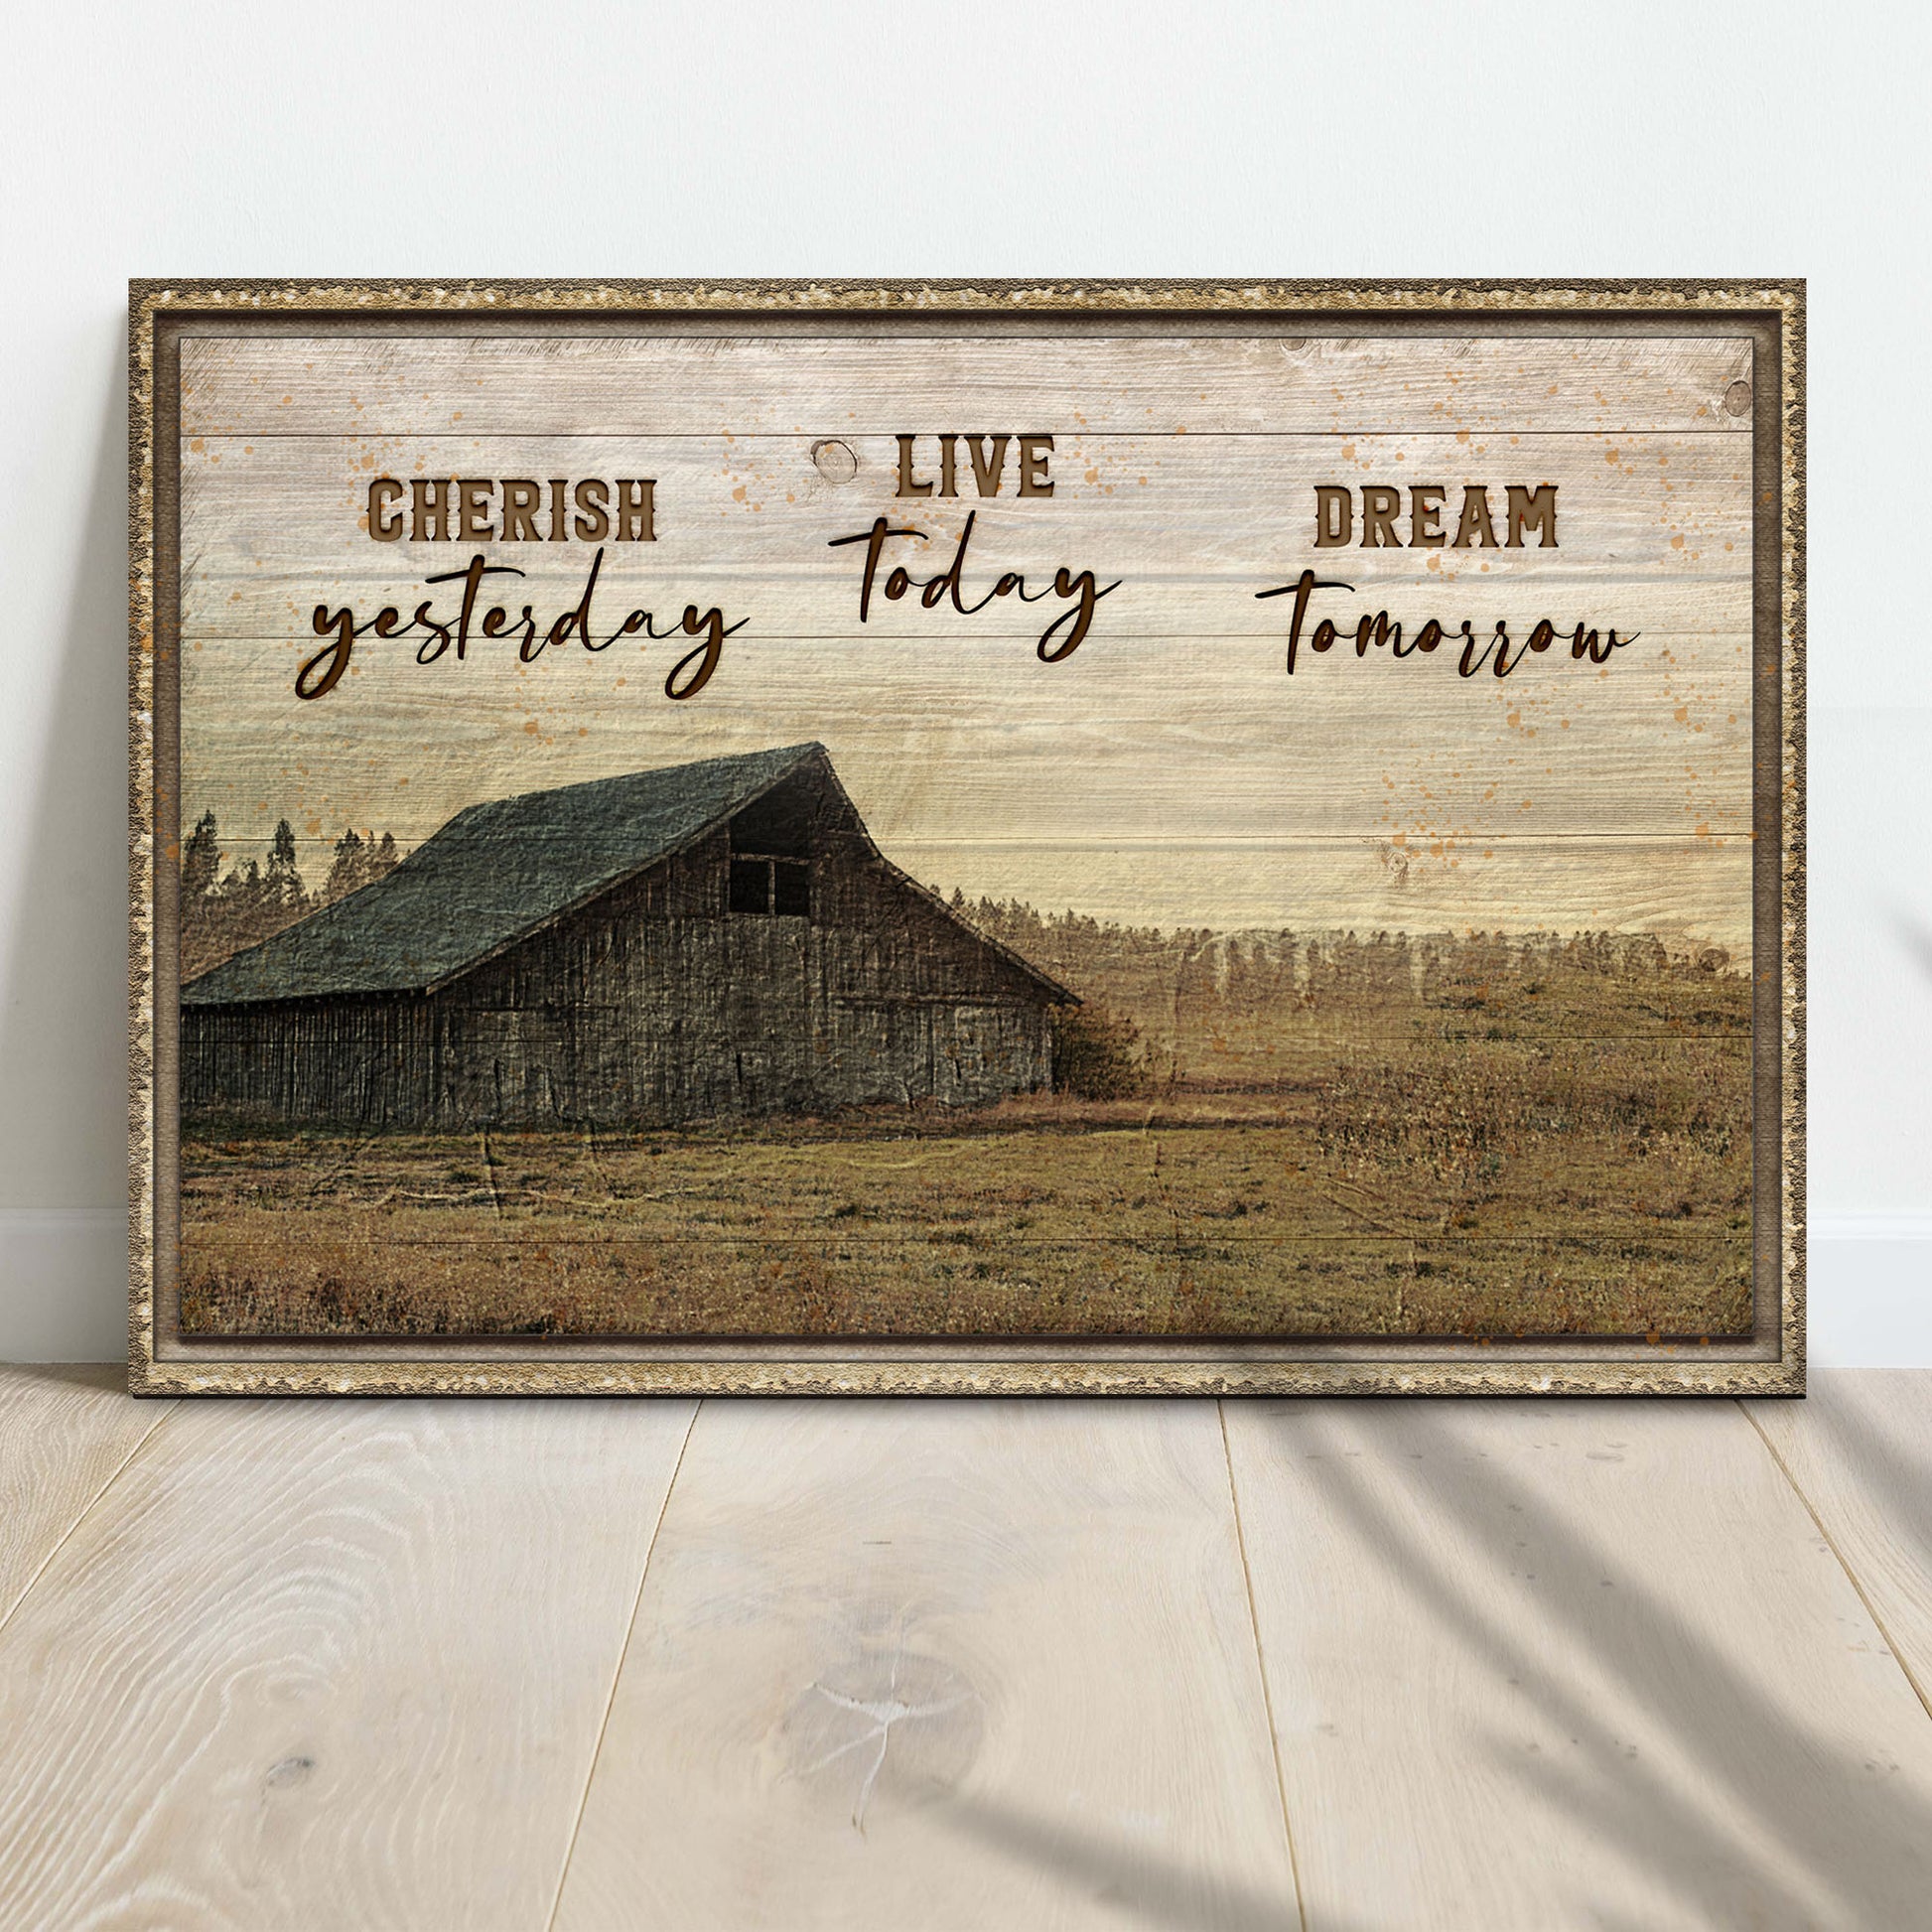 Cherish Yesterday, Live Today, Dream Tomorrow Sign Style 2 - Image by Tailored Canvases